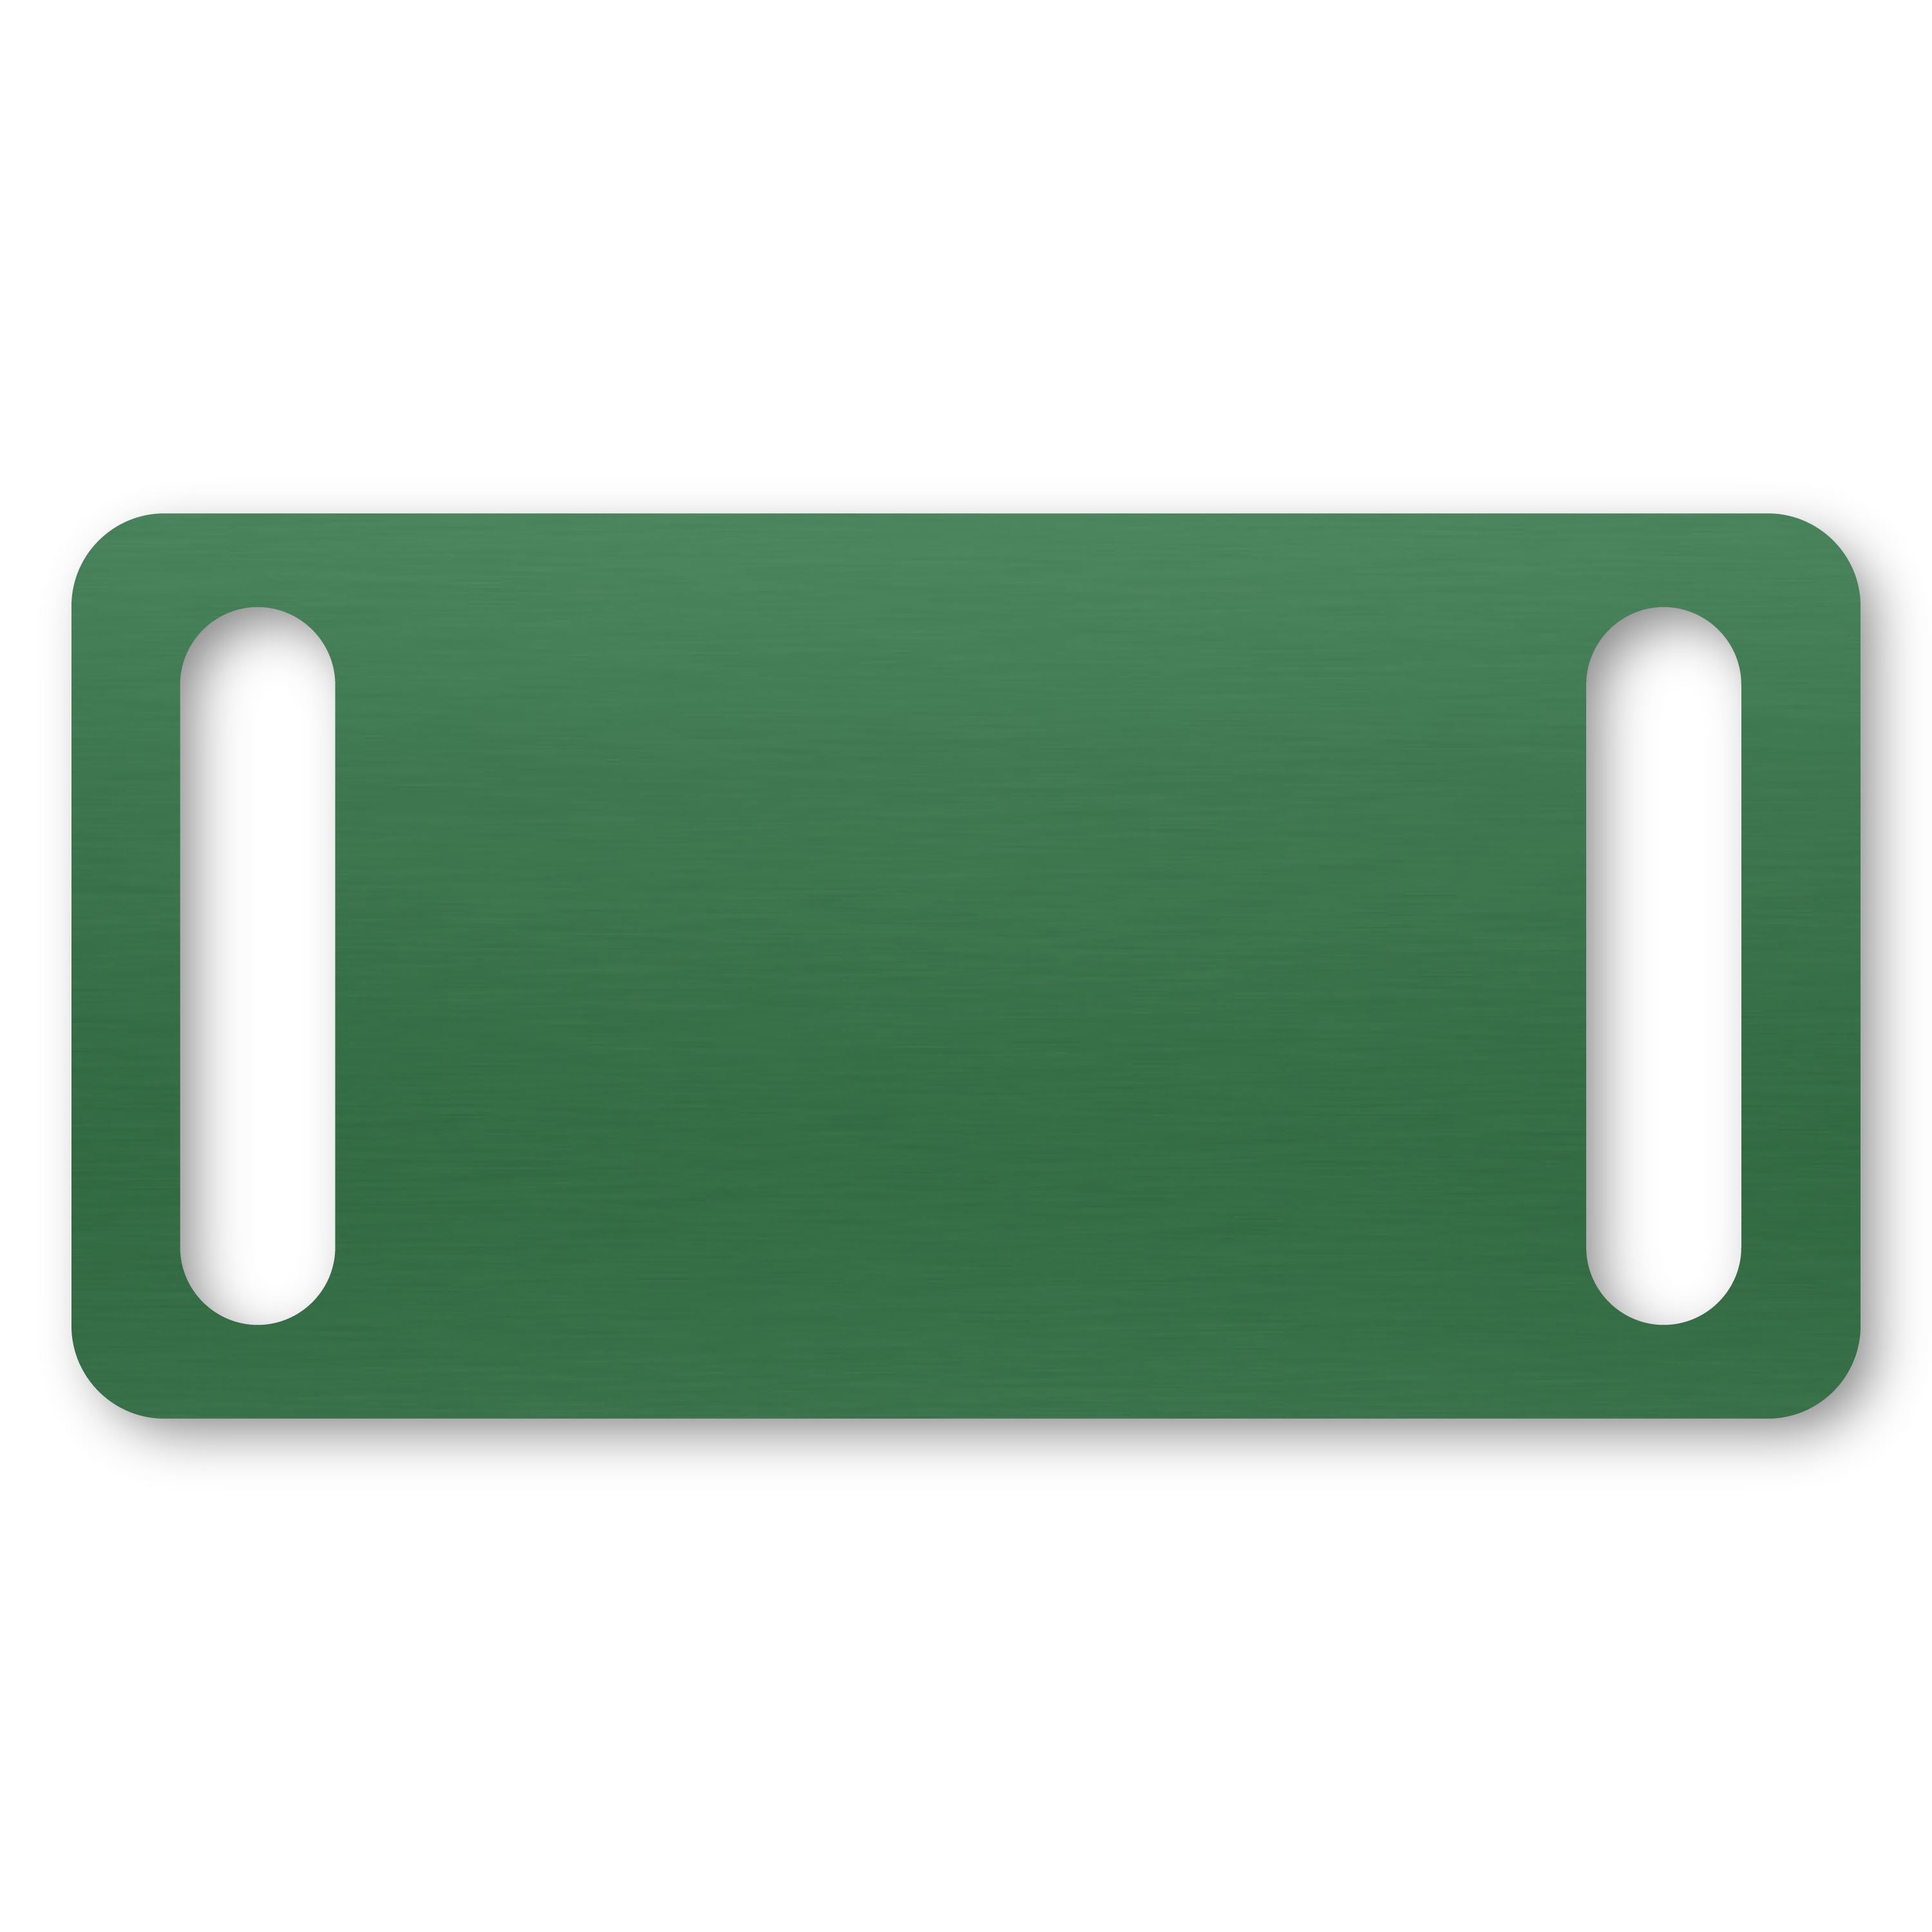 Anodized Aluminum Rectangle Slide-On Tags, 7/8" x 1-3/4" with 5/32" x 3/4" Slot, Laser Engraved Metal Tags Craftworks NW Green 